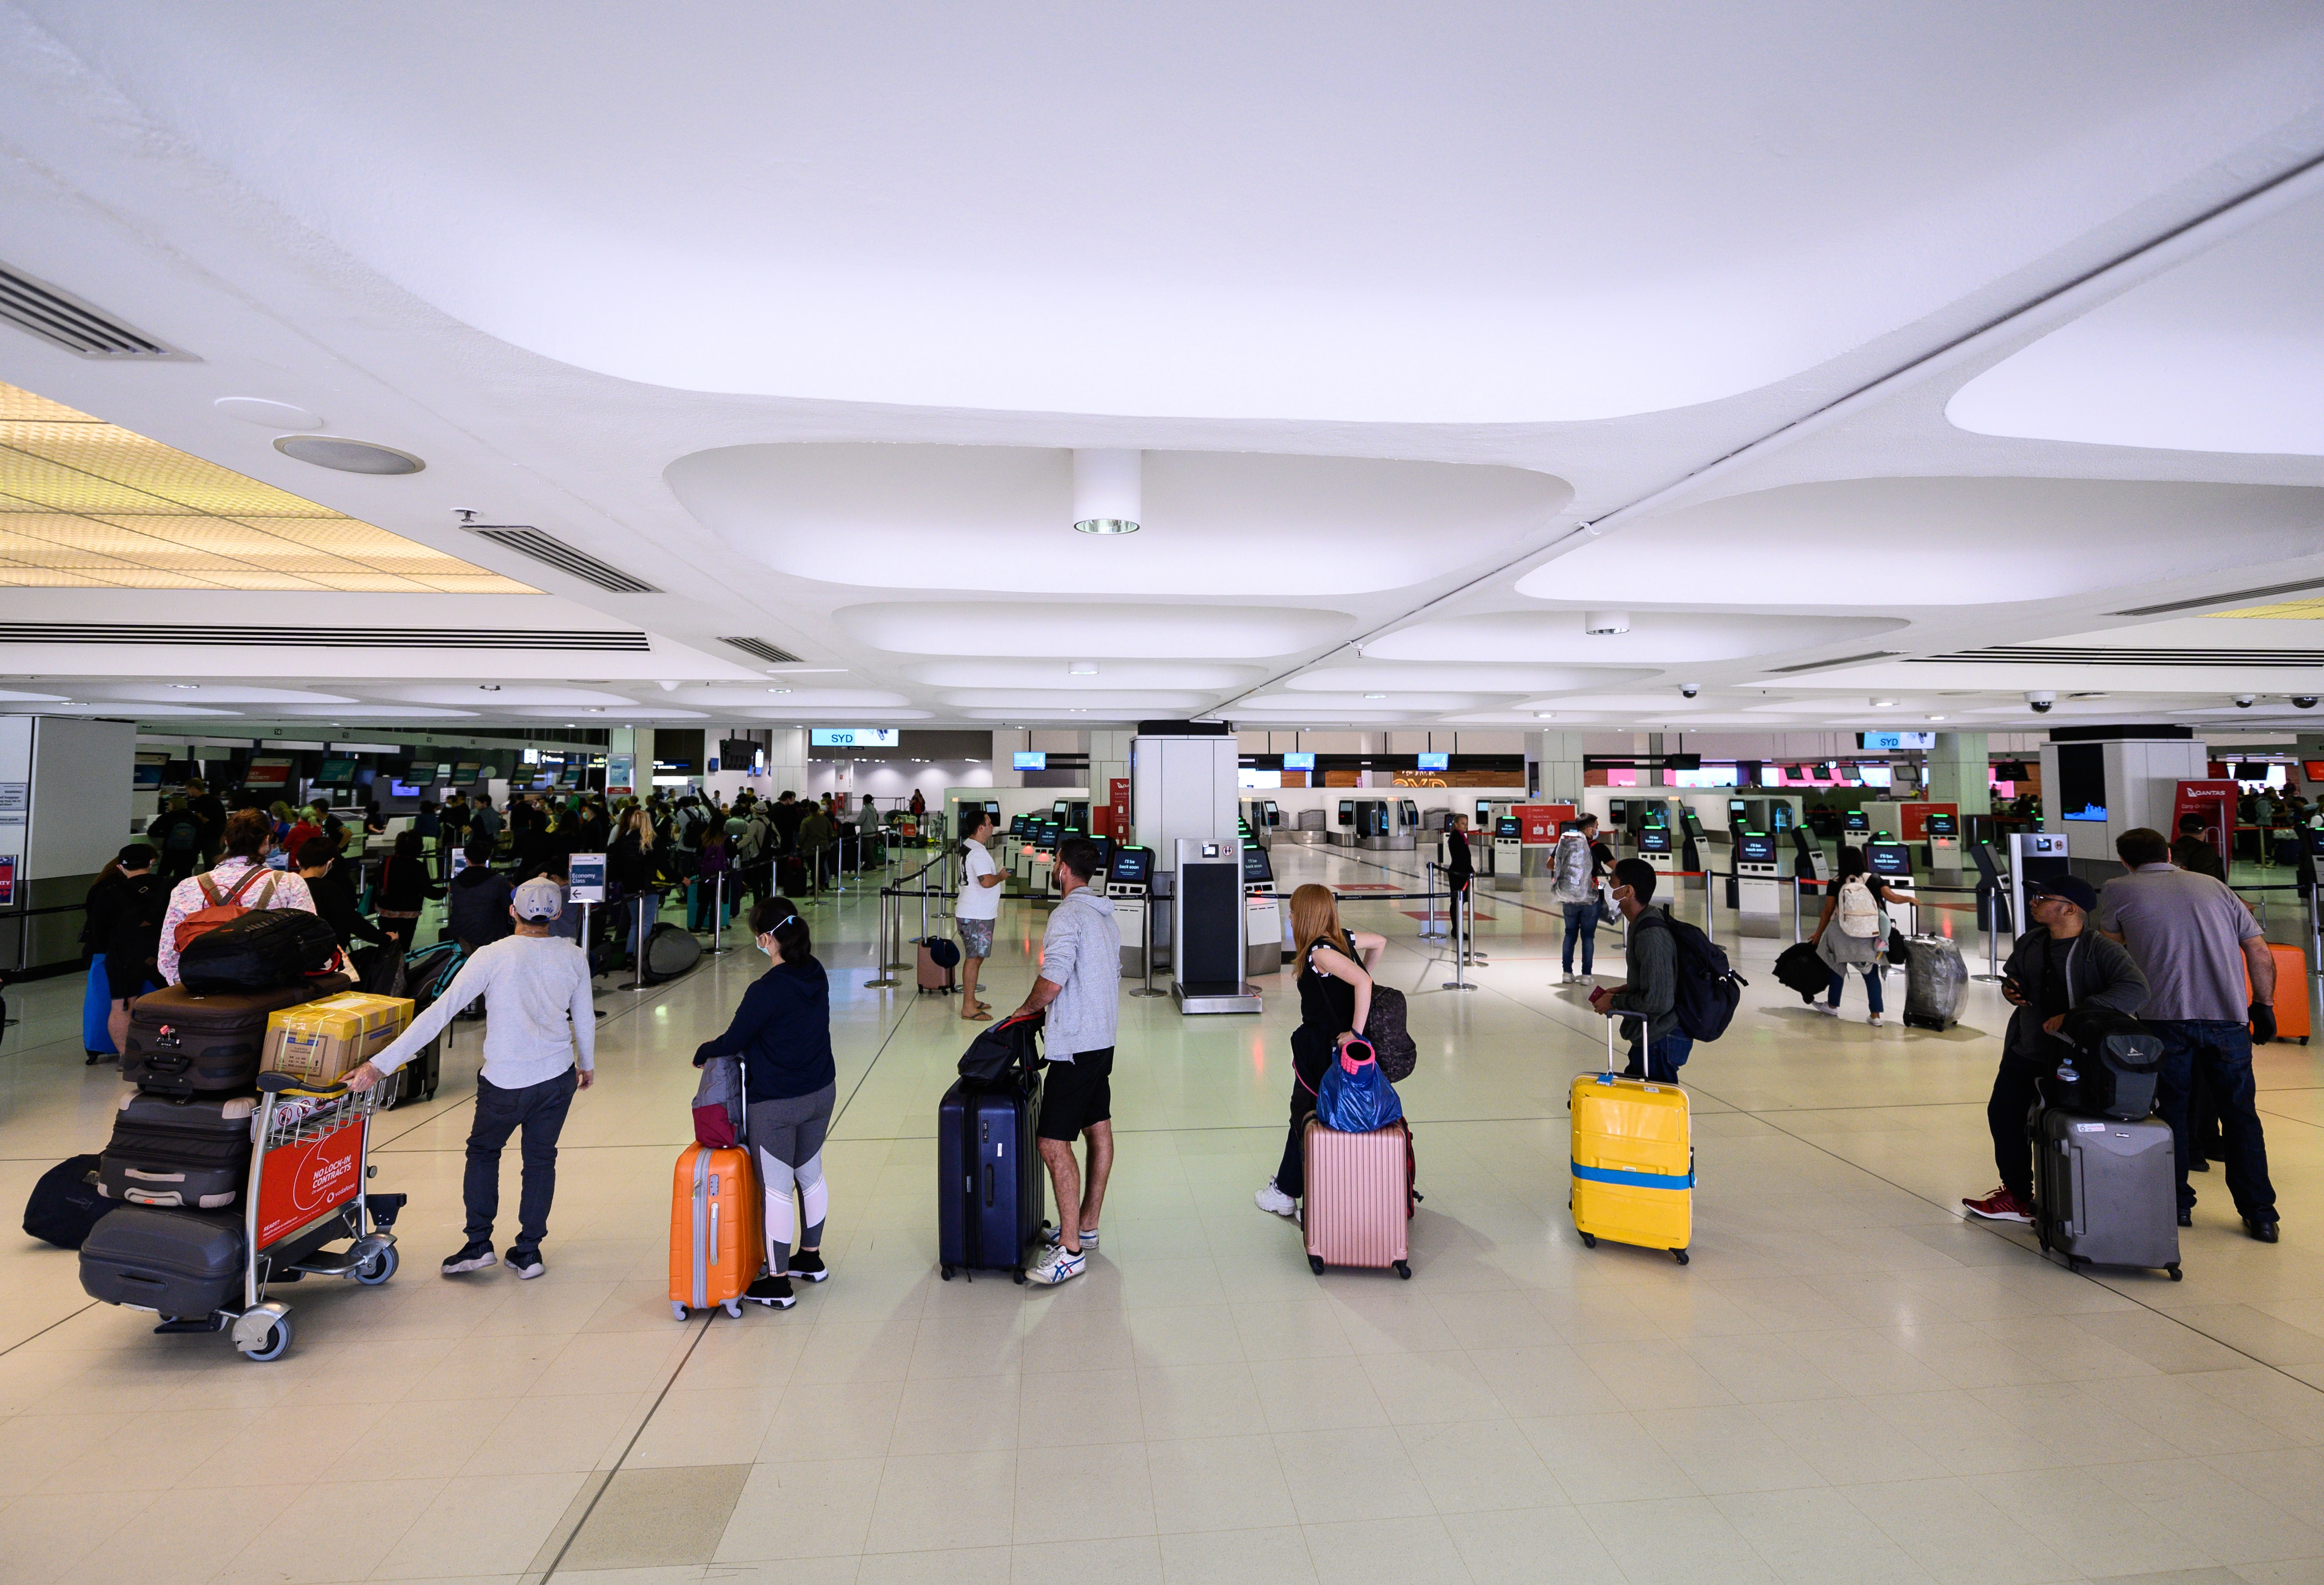 Travellers adhere to social distancing rules as they check in for their flights at Sydney International Airport in March 2020.